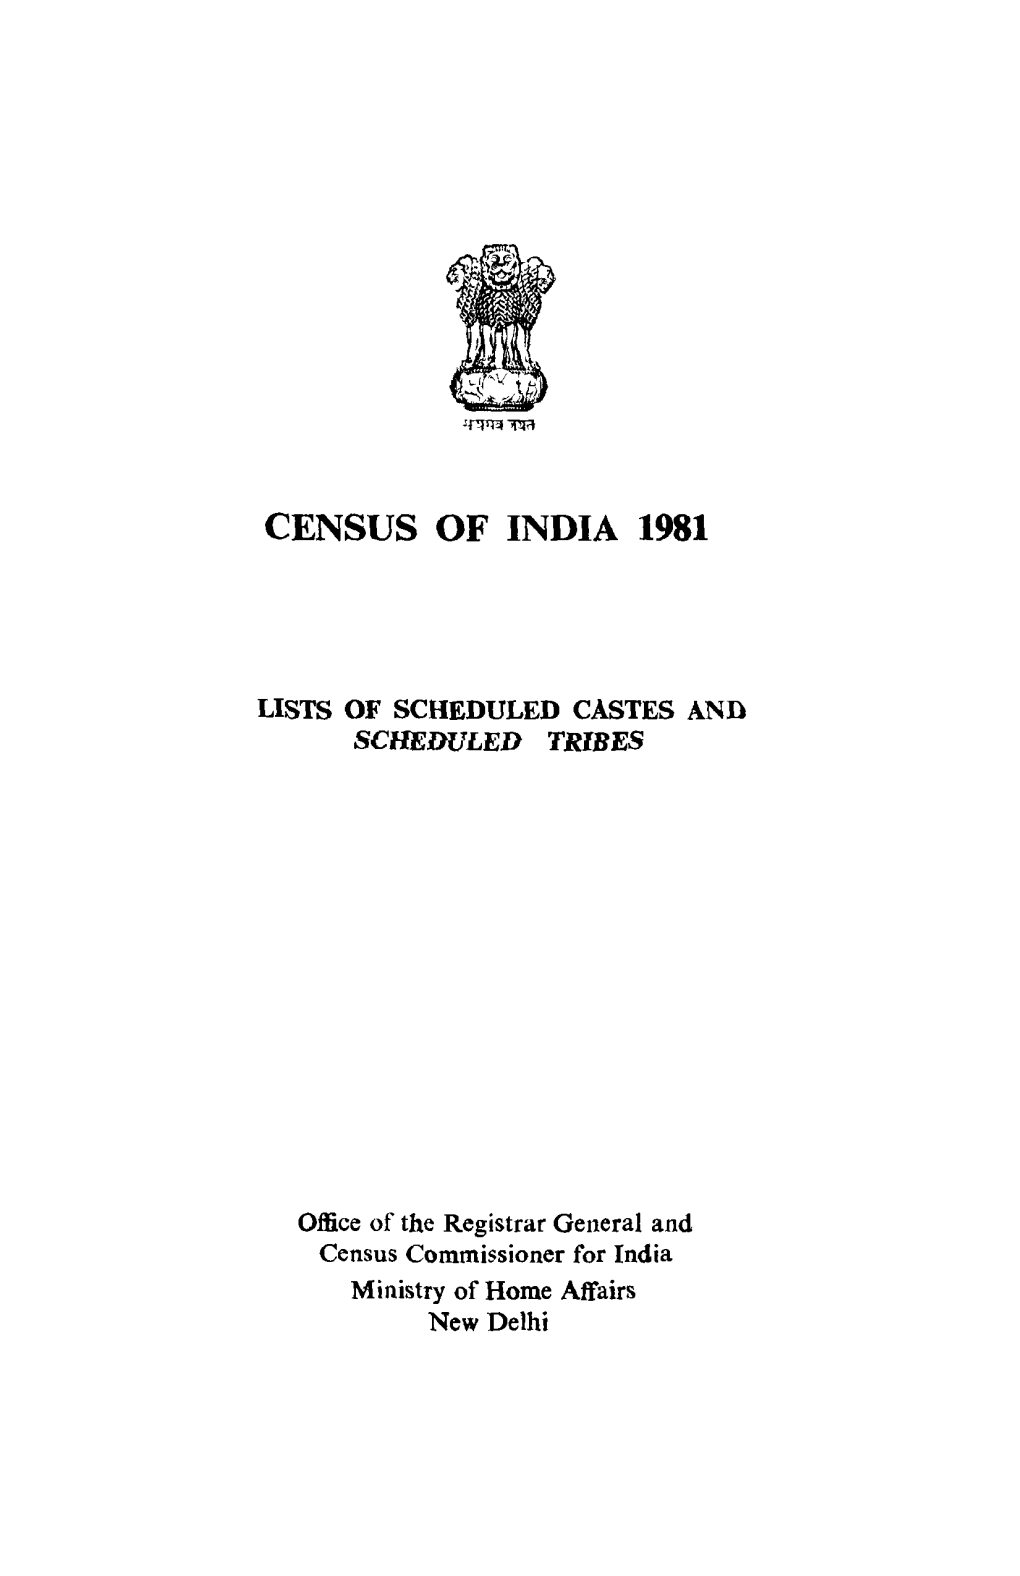 Lists of Scheduled Castes and Scheduled Tribes